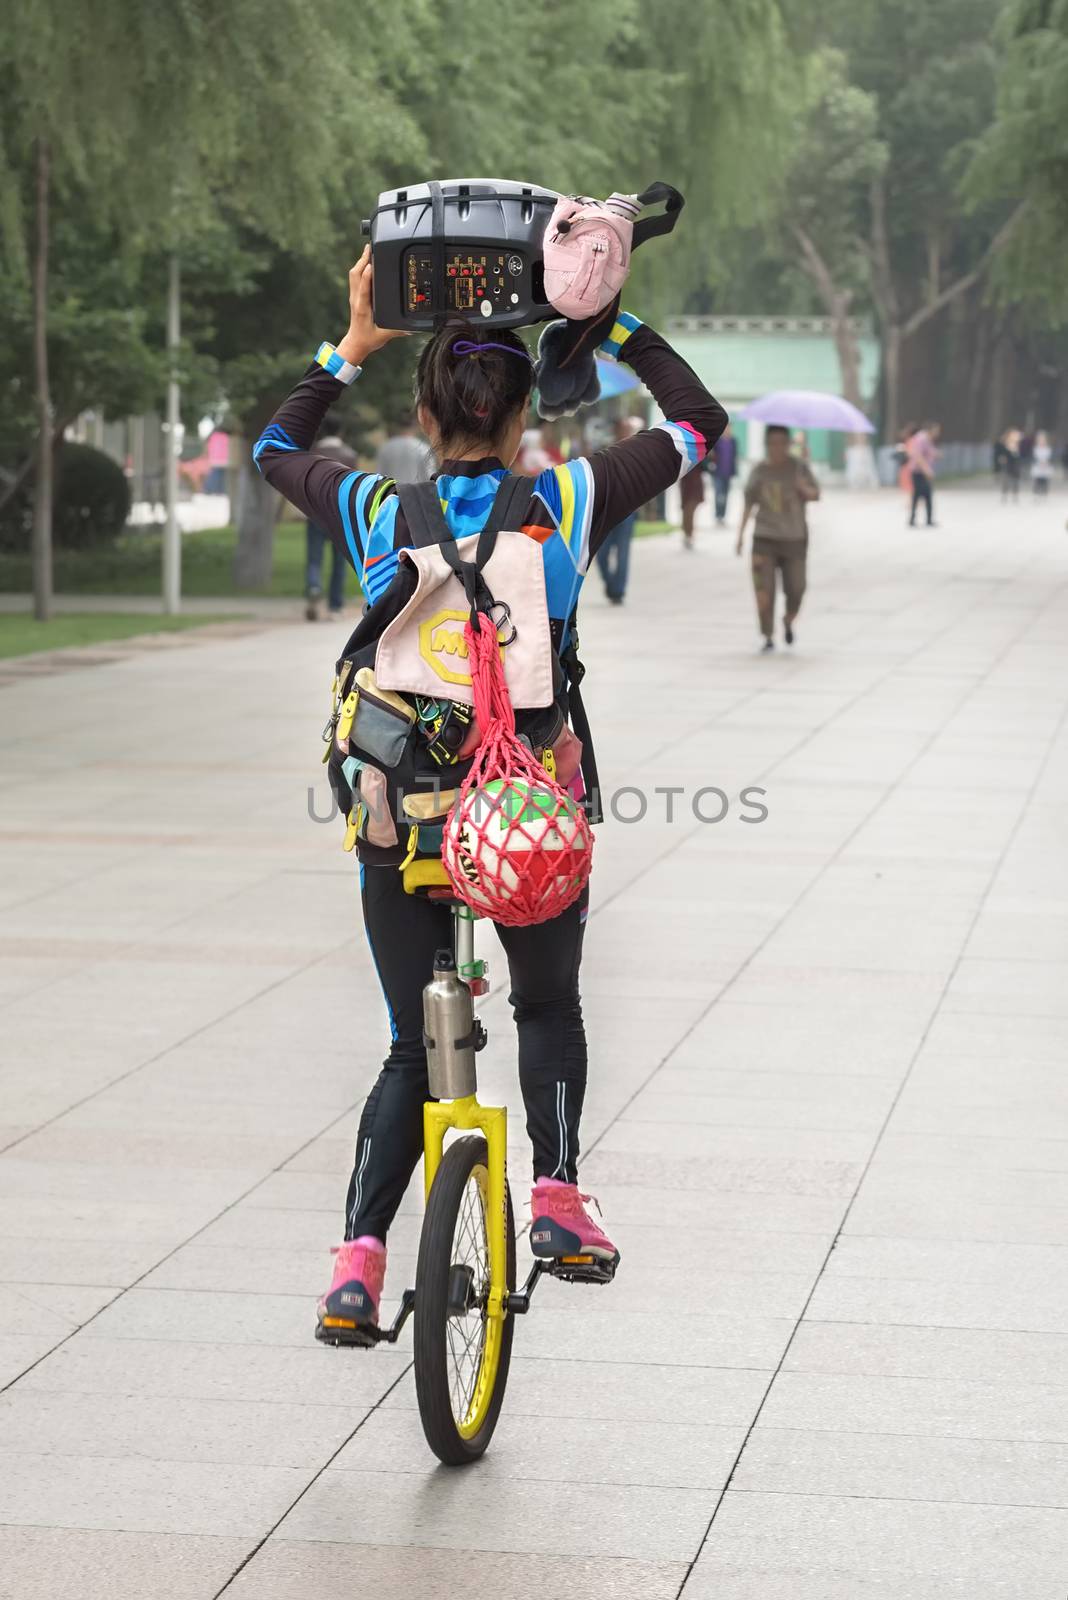 Harbin, Heilongjiang, China - September 2018: Girl driving unicycle outdoors. Girl on the unicycle